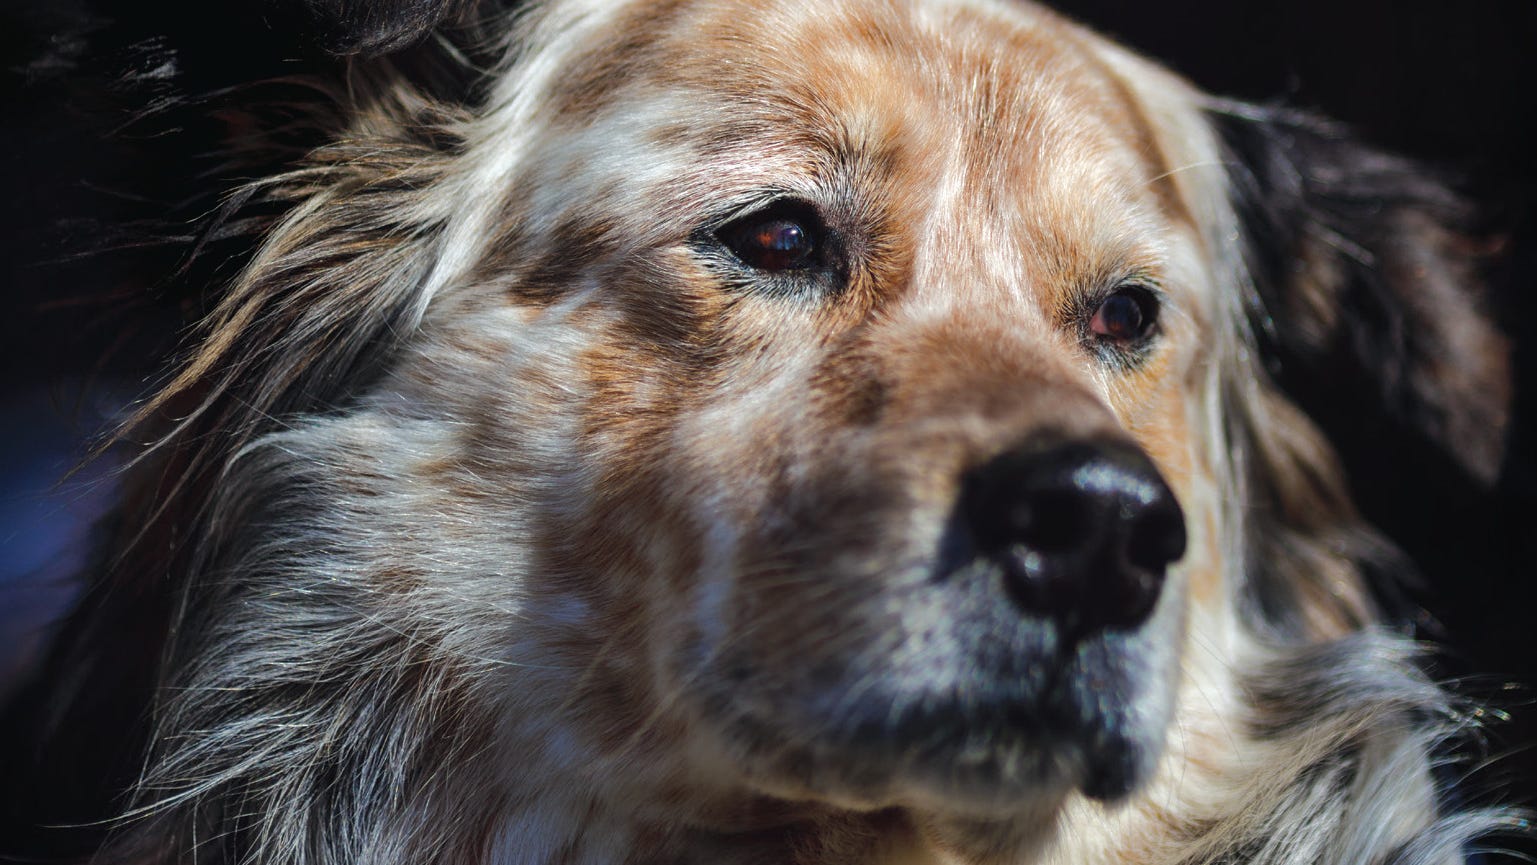 'The Speckled Beauty': Rick Bragg's mangy mutt will steal your heart